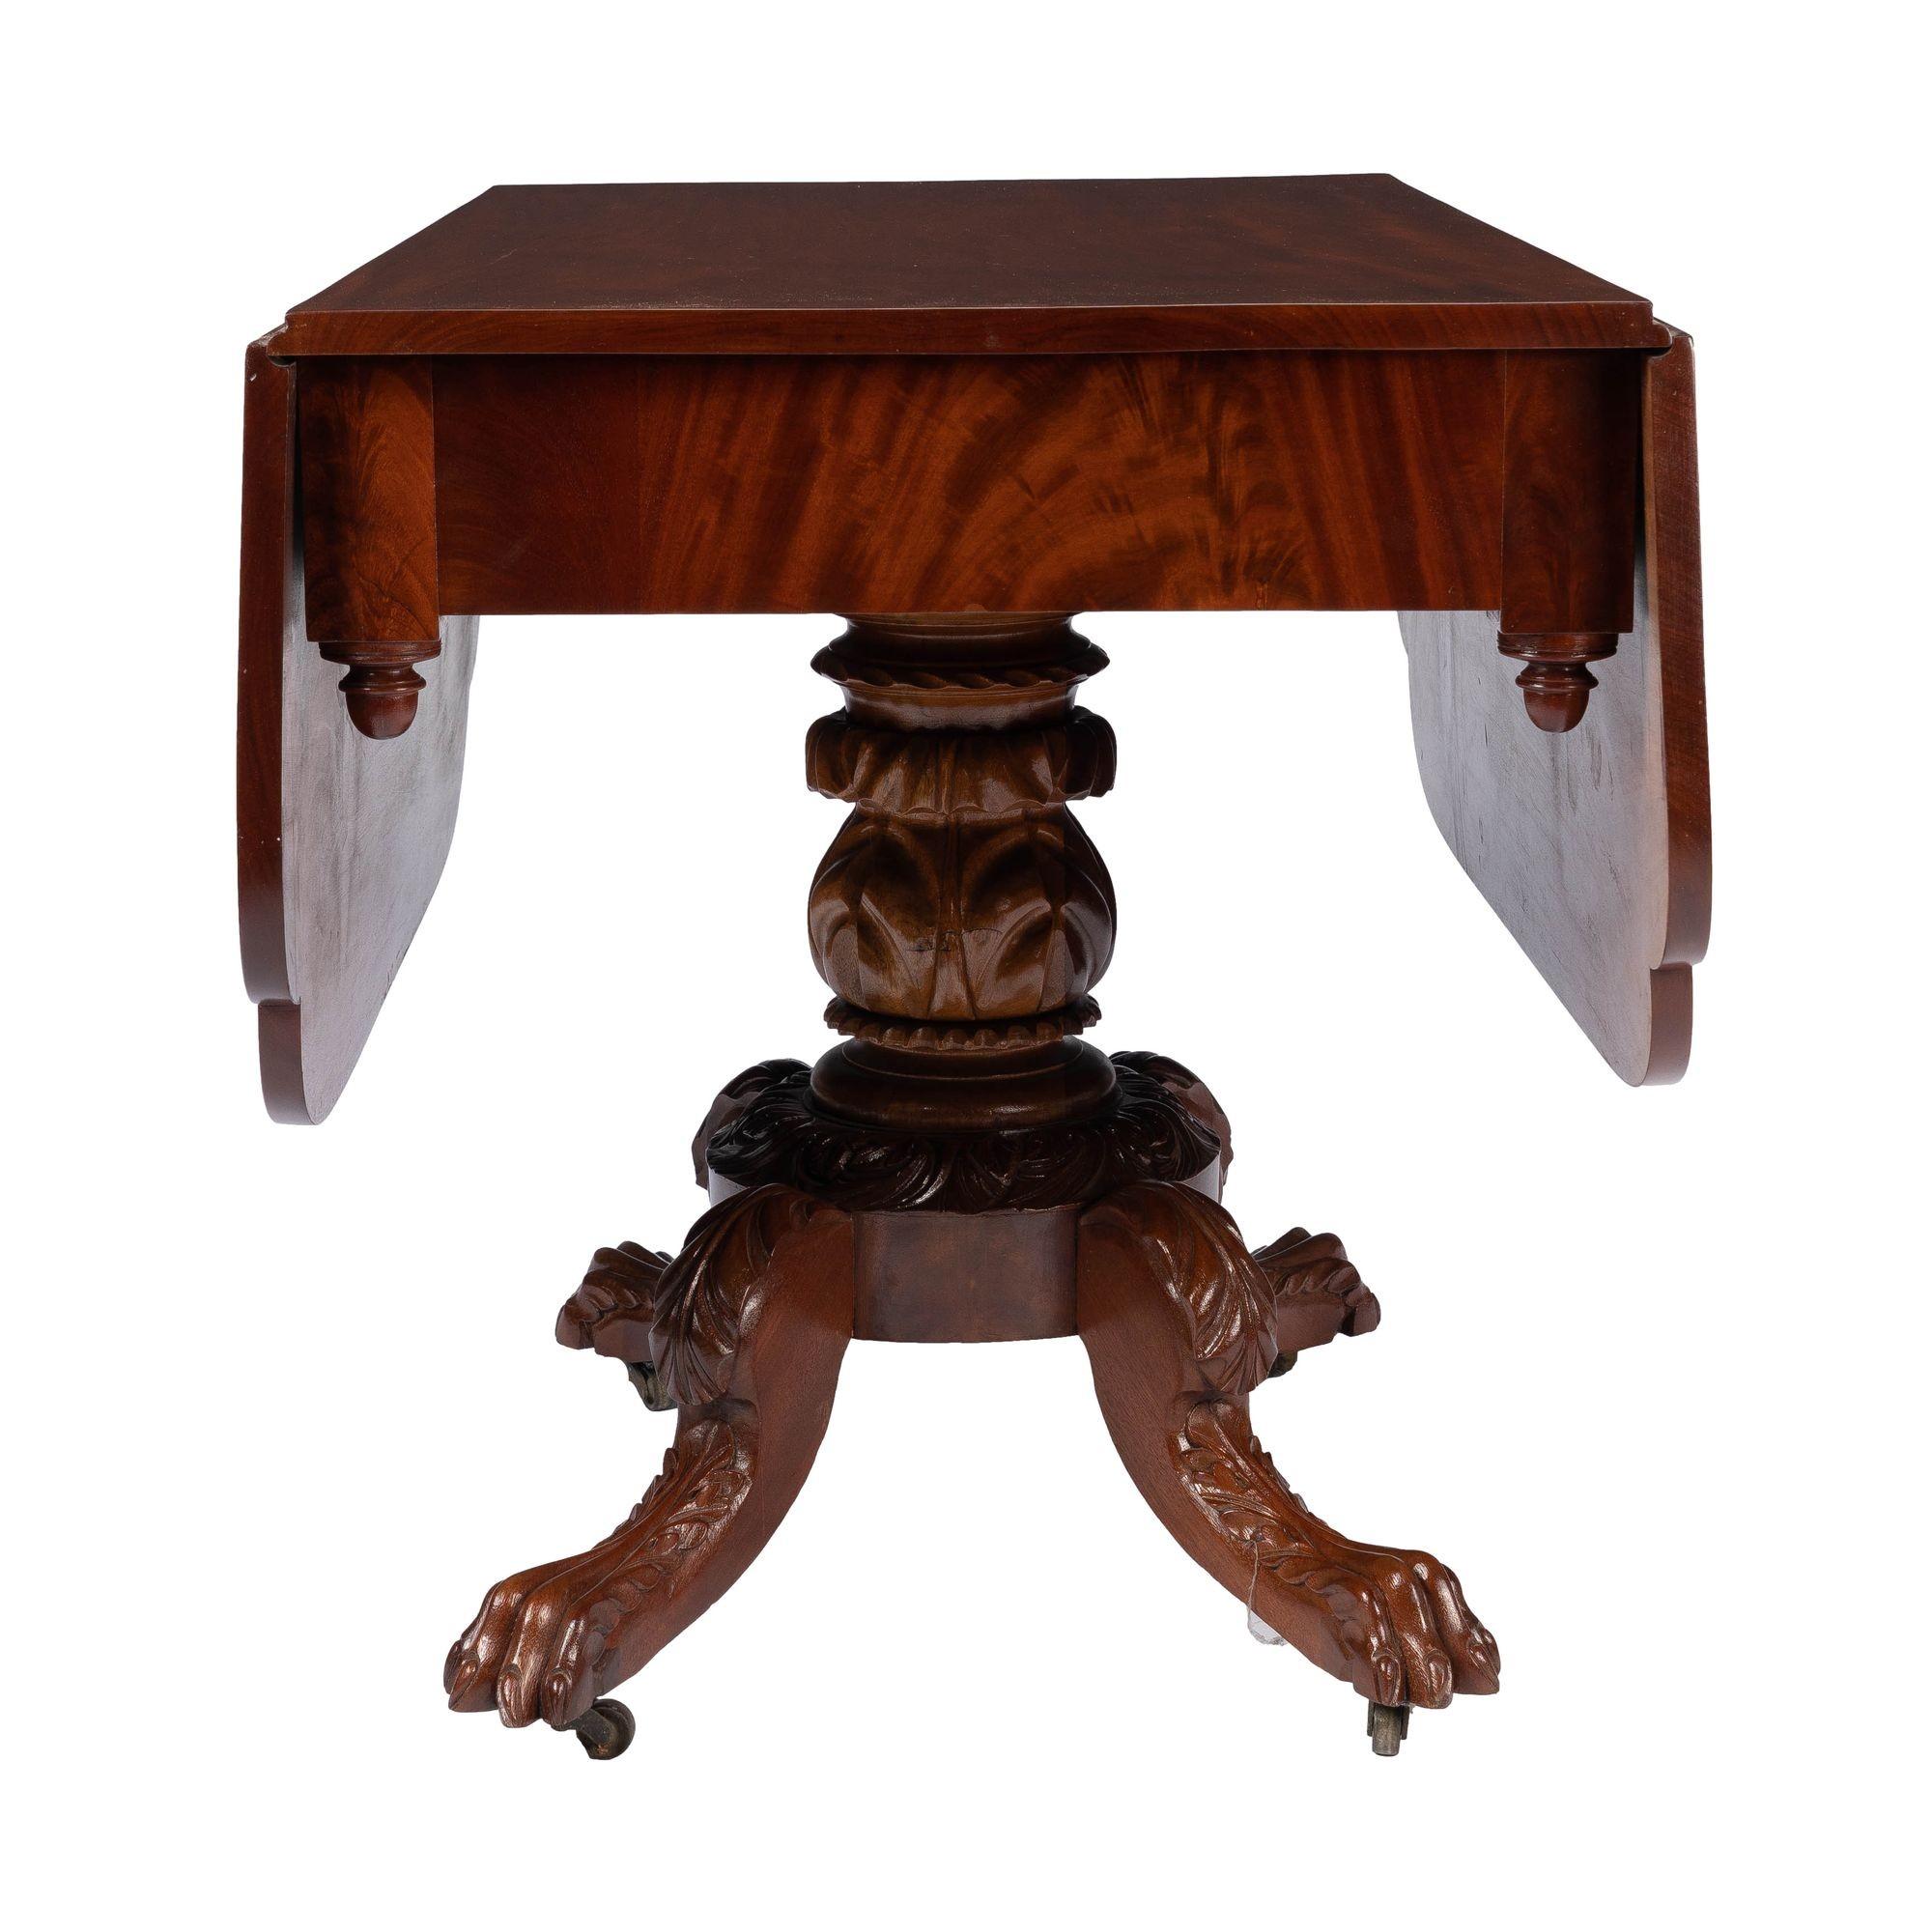 American neoclassic drop leaf breakfast table with an acanthus carved pedestal base. This magnificent solid single board table top is mounted with two hinged drop leaves, cut with dimpled corners, and supported by pairs of butterfly brackets. The